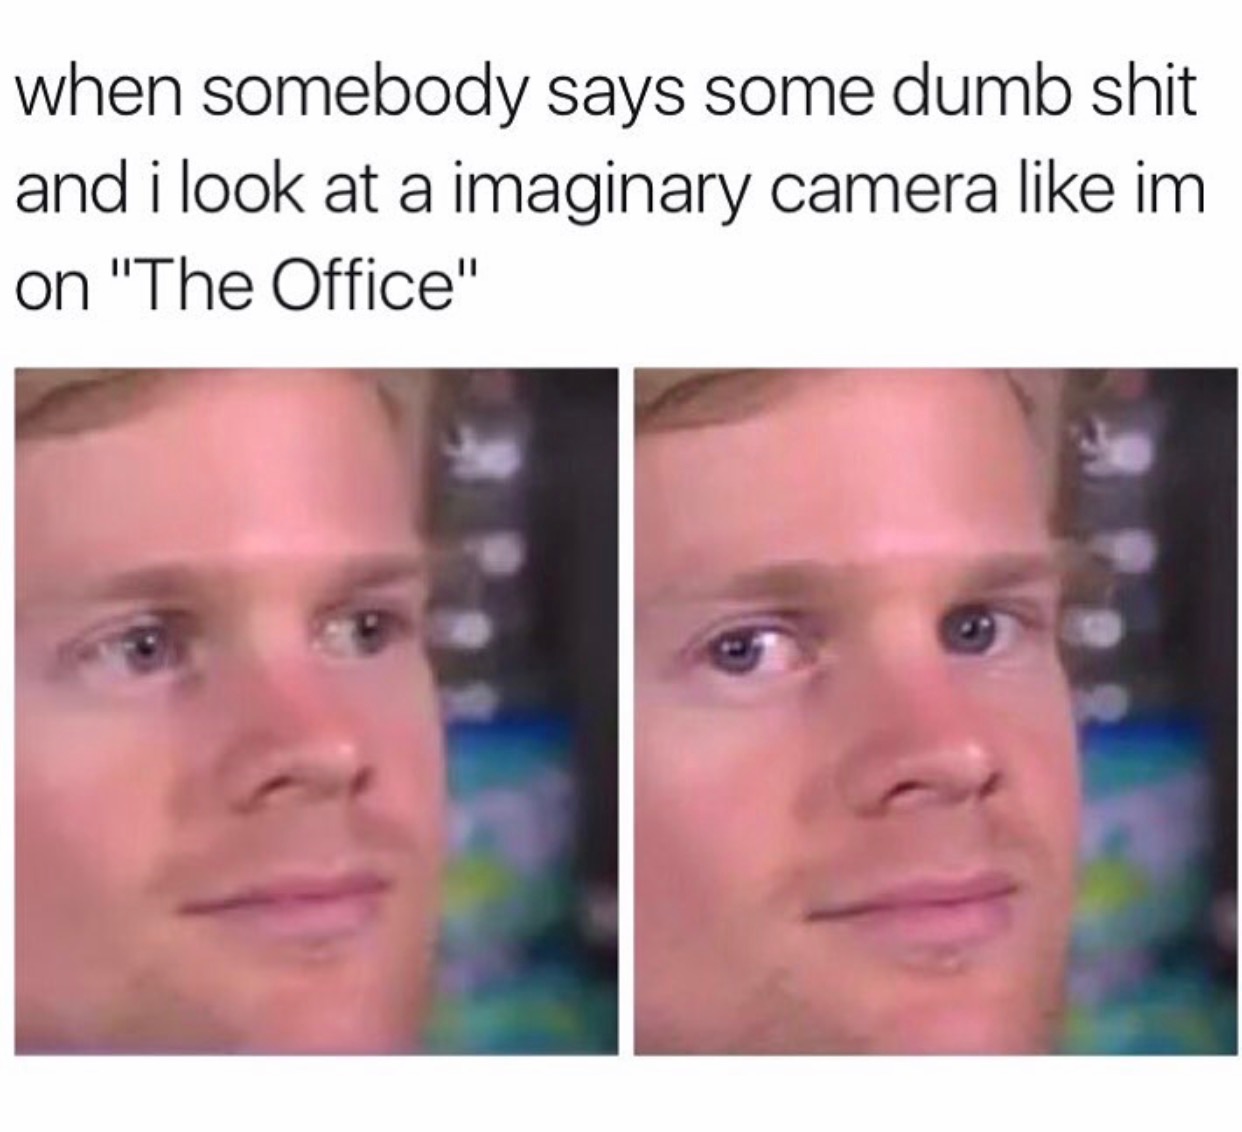 someone says some dumb shit meme - when somebody says some dumb shit and i look at a imaginary camera im on "The Office"